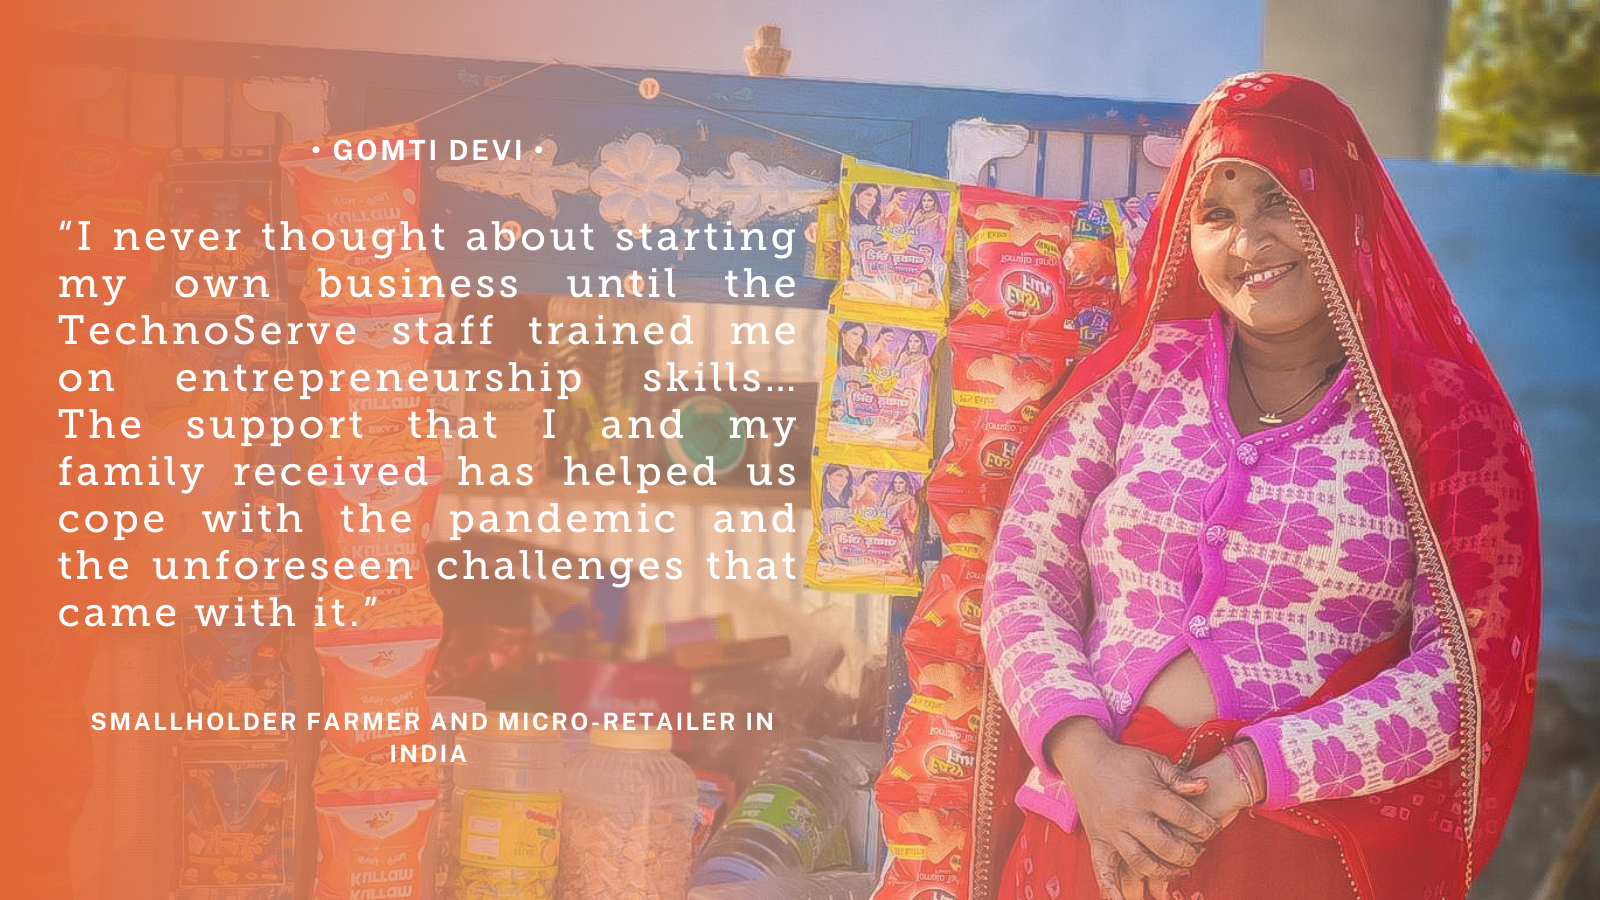 Orange quote graphic reads: “I never thought about starting my own business until the TechnoServe staff trained me on entrepreneurship skills…The support that I and my family received has helped us cope with the pandemic and the unforeseen challenges that came with it.”